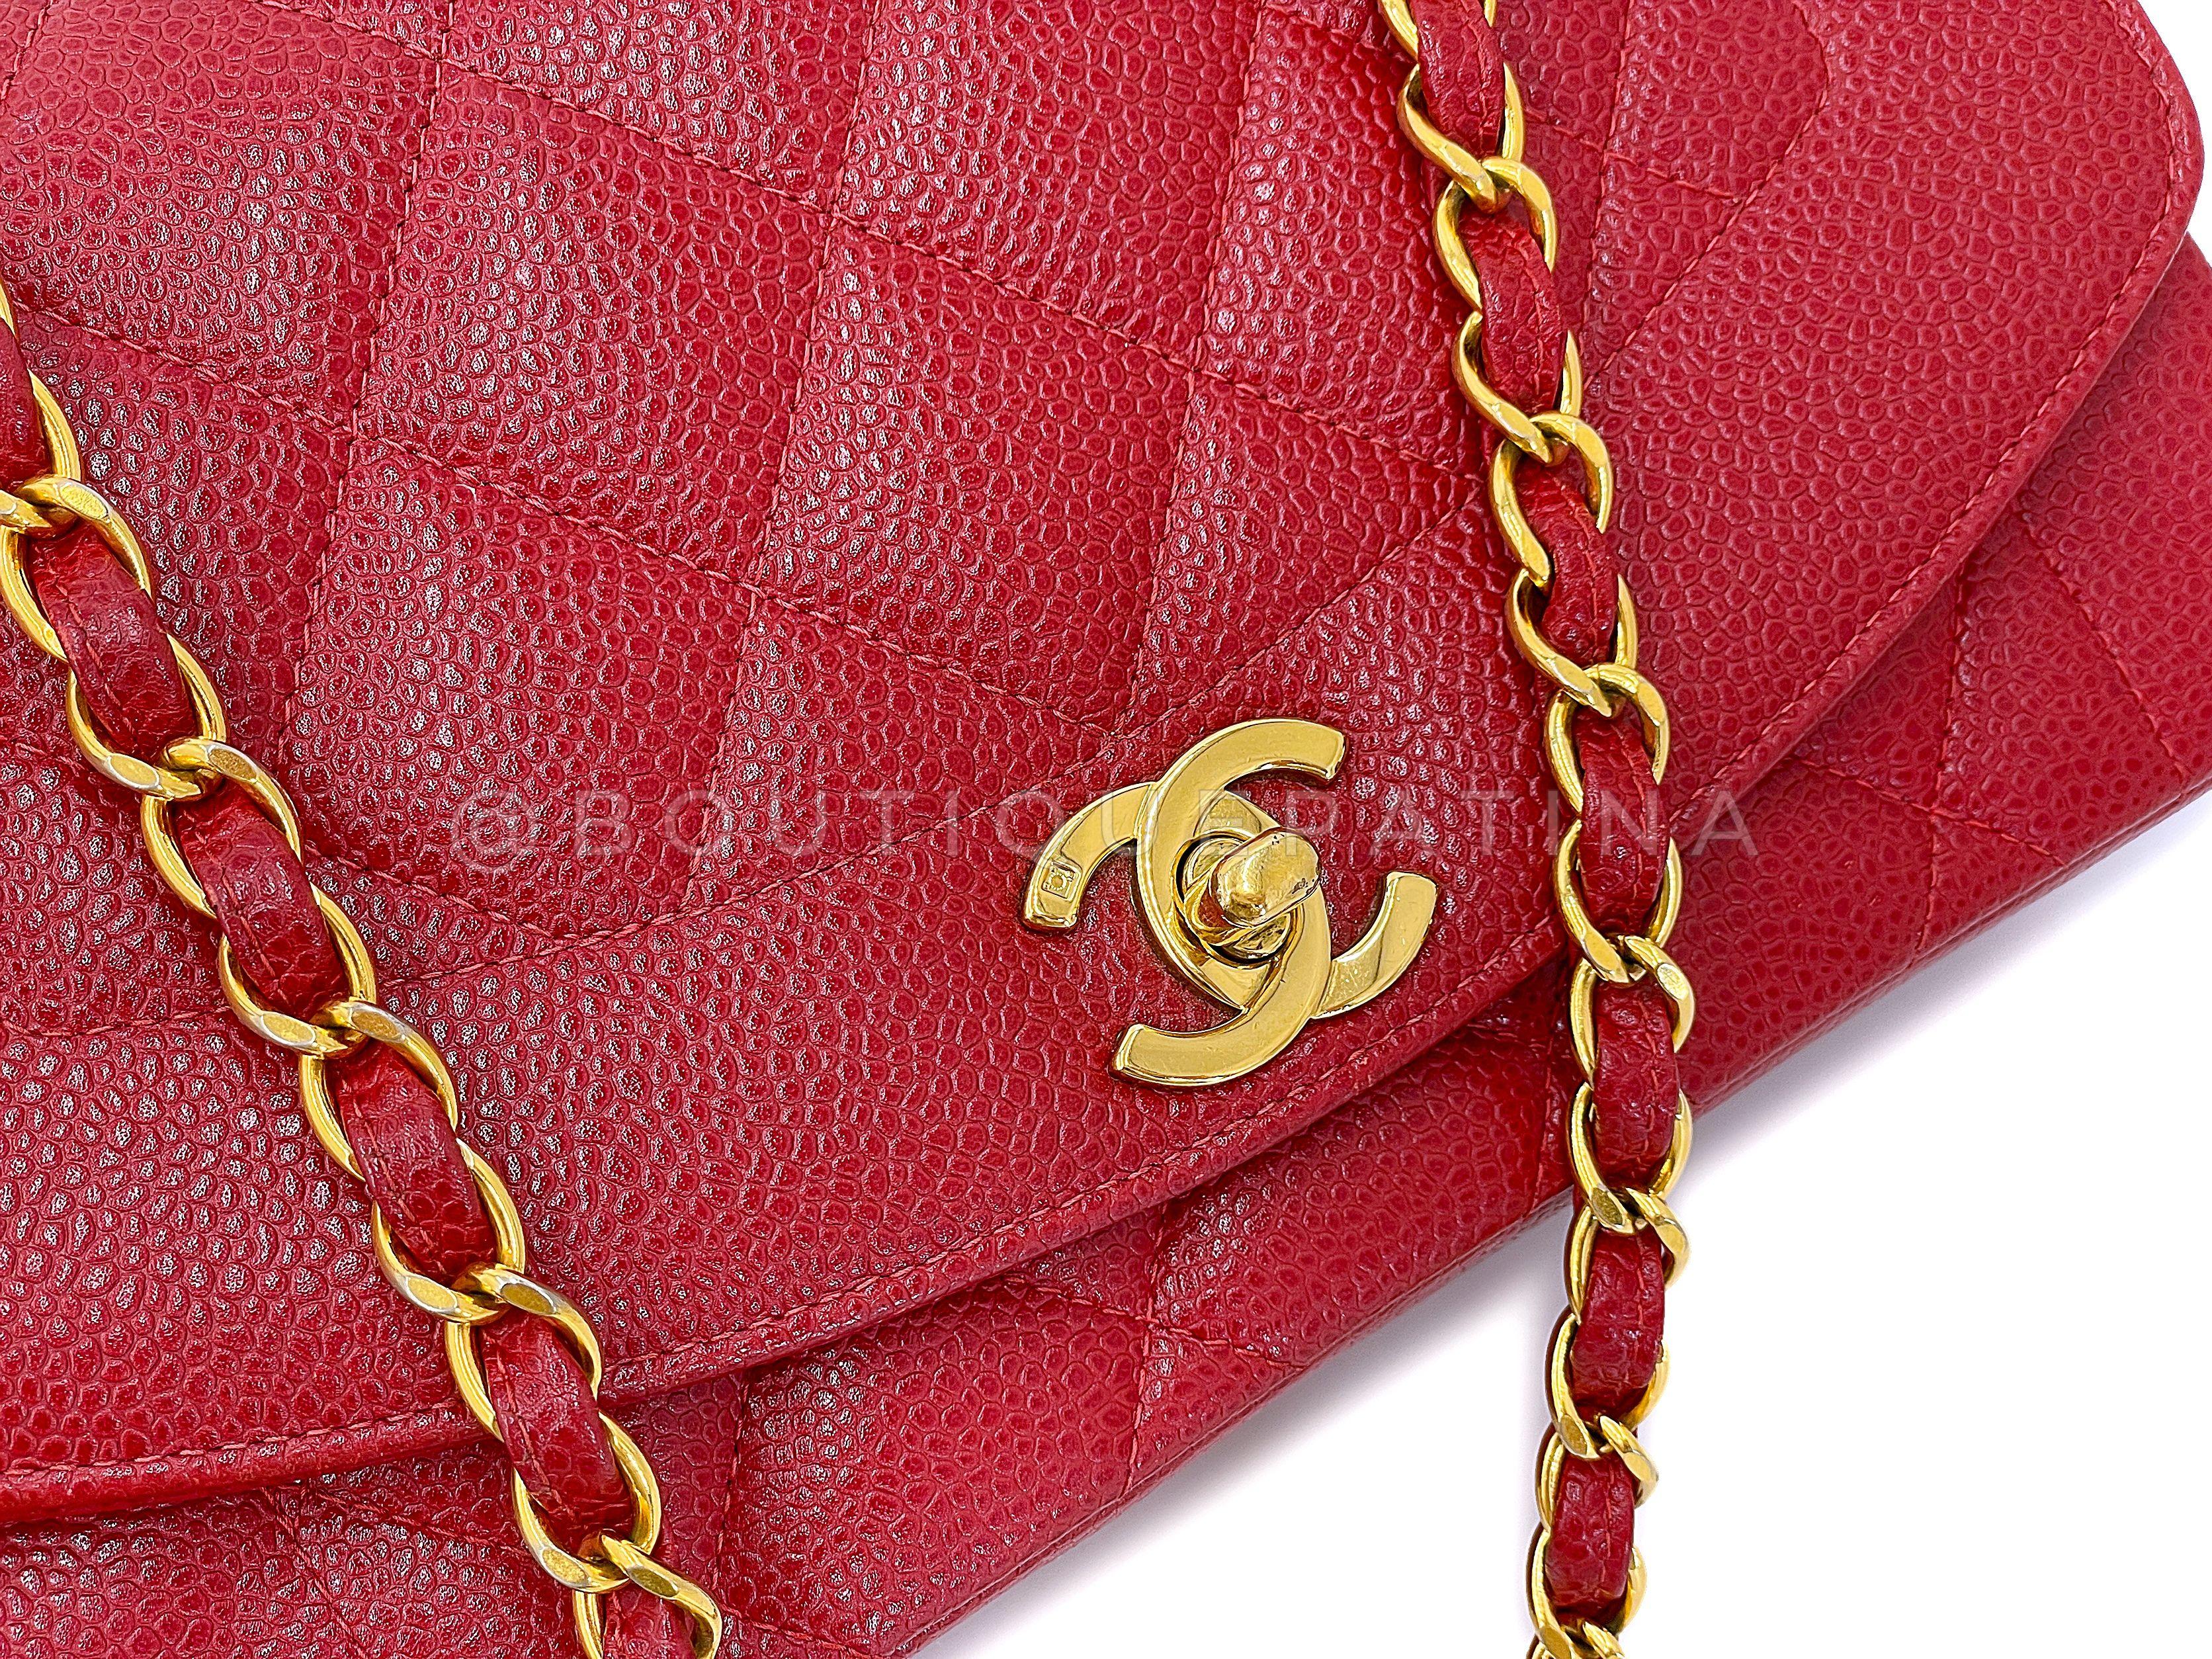 Chanel Vintage Red Caviar Small Diana Flap Bag 24k GHW 67655 For Sale 4